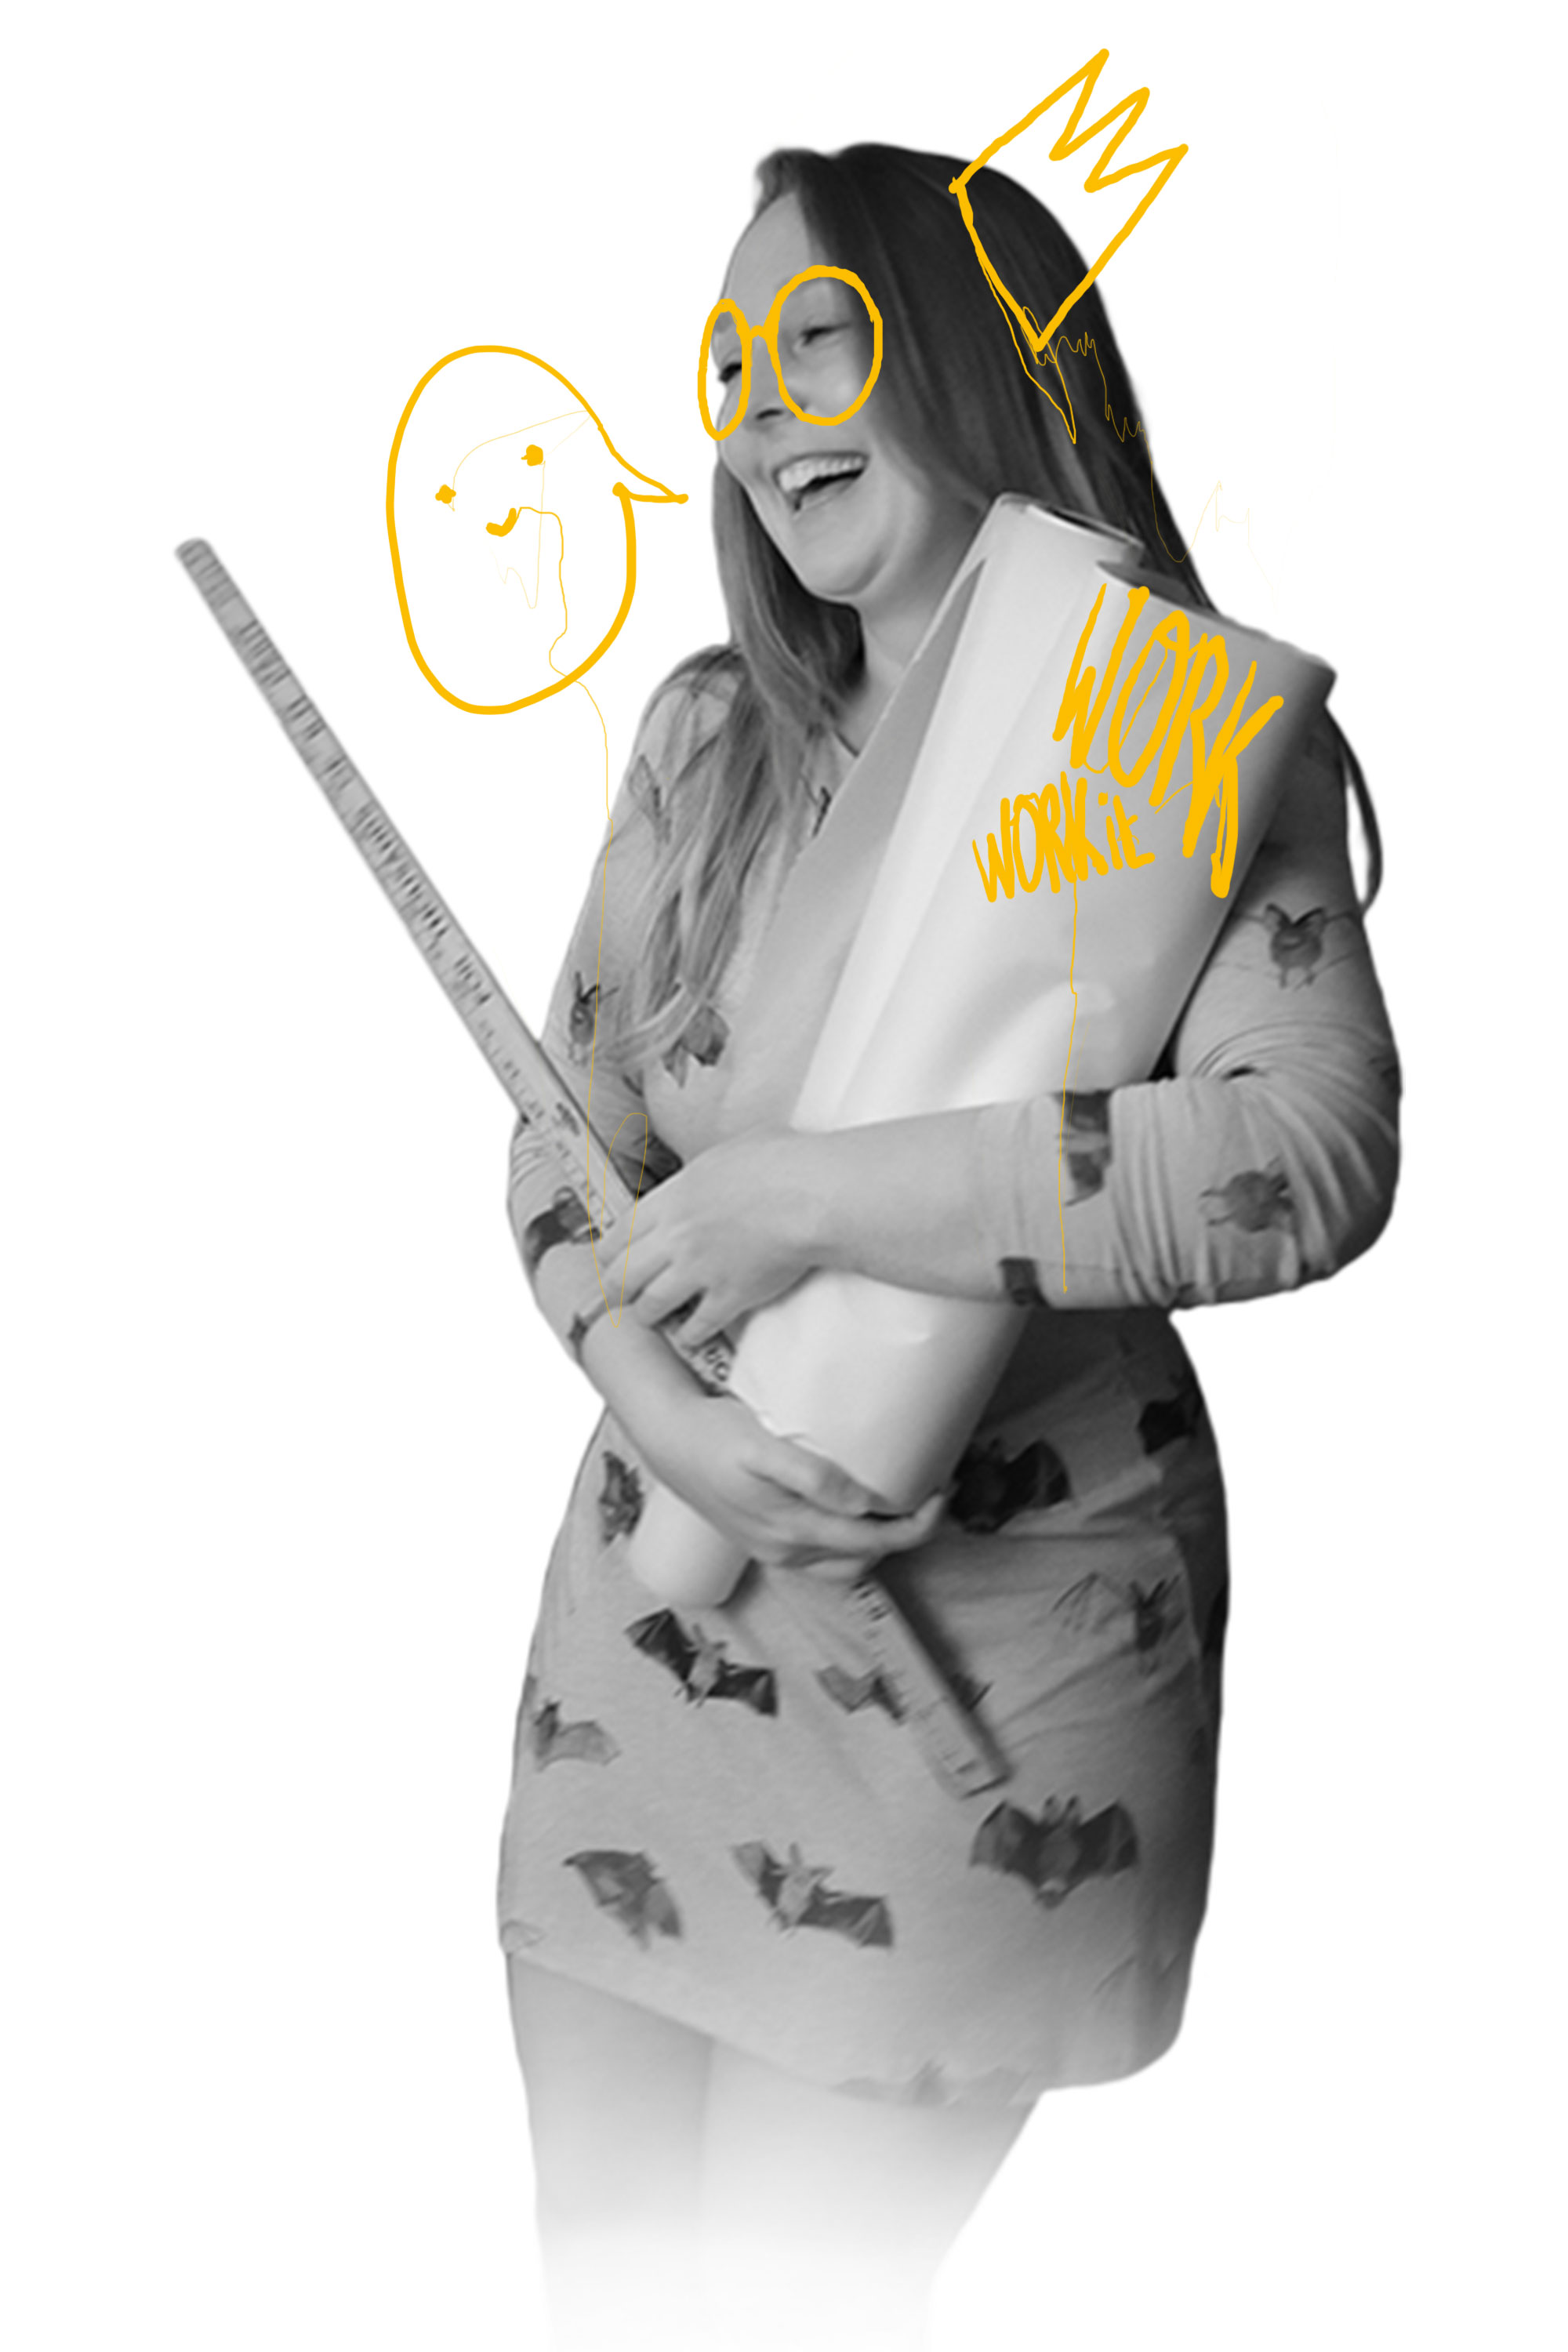 picture of lore berg laughing holding reems of paper and a yard stick